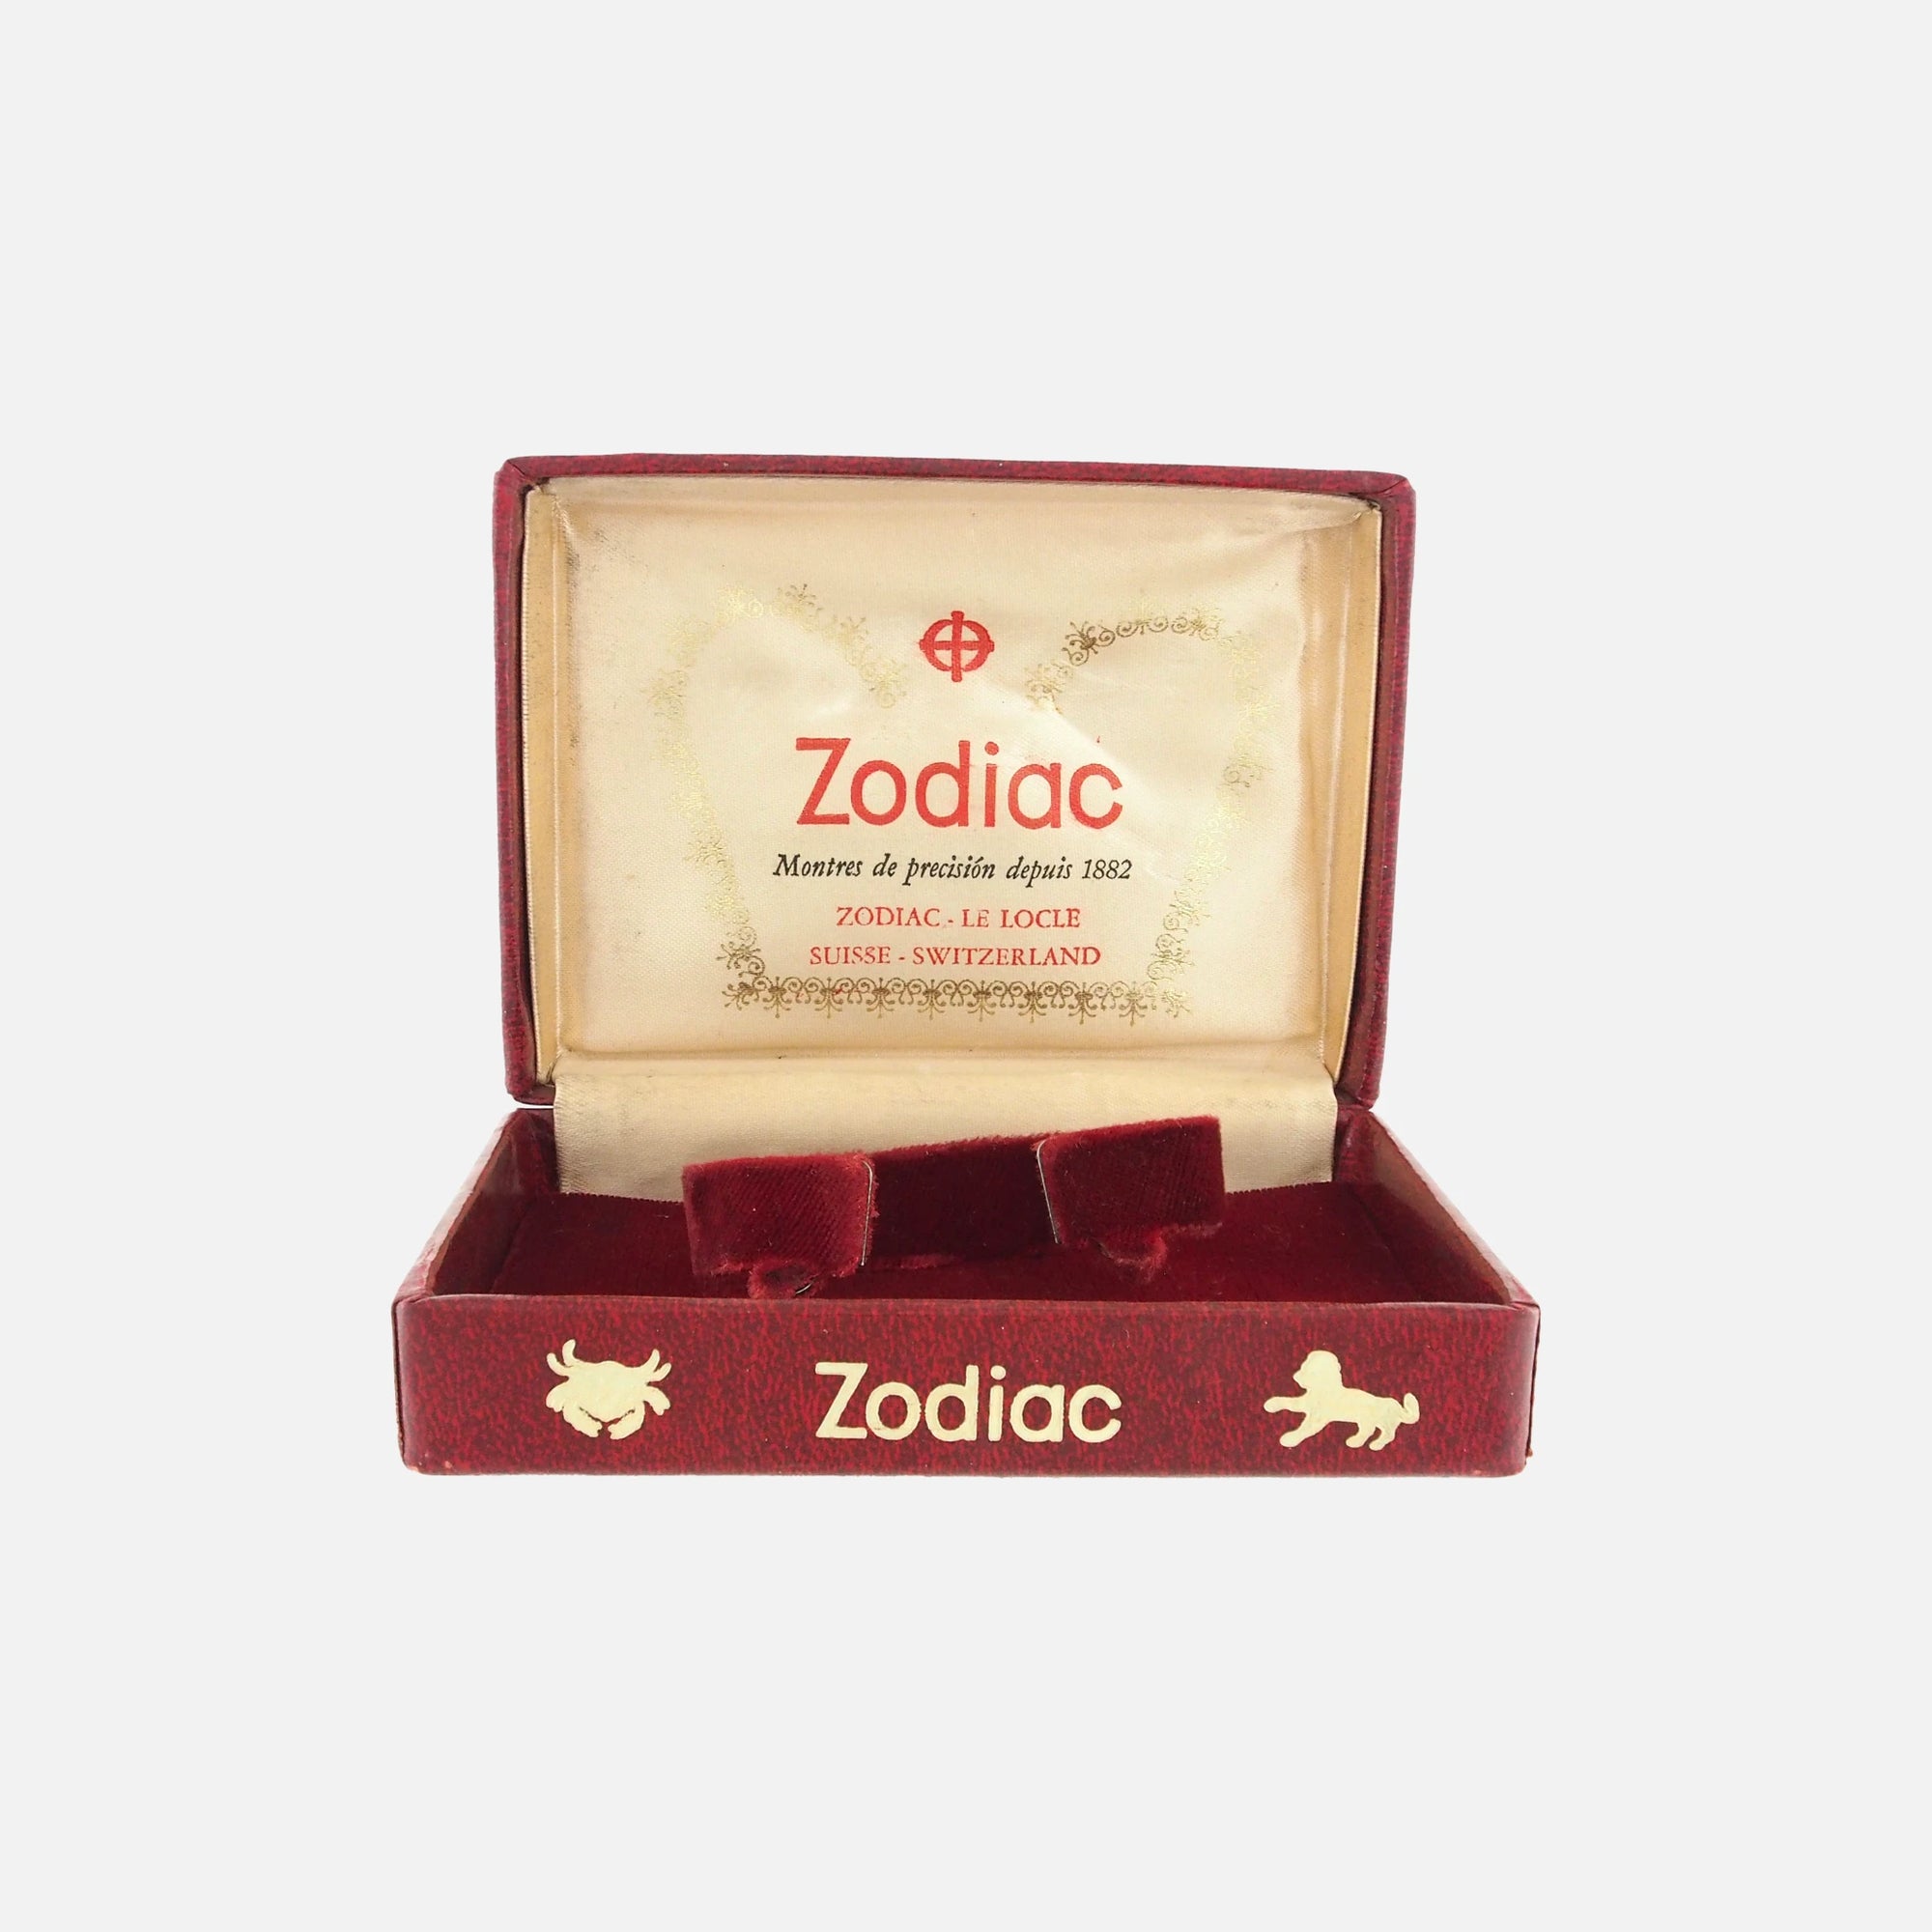 1950s - 1960s Zodiac Vintage Watch Box for sale on Vintage Watch Leader